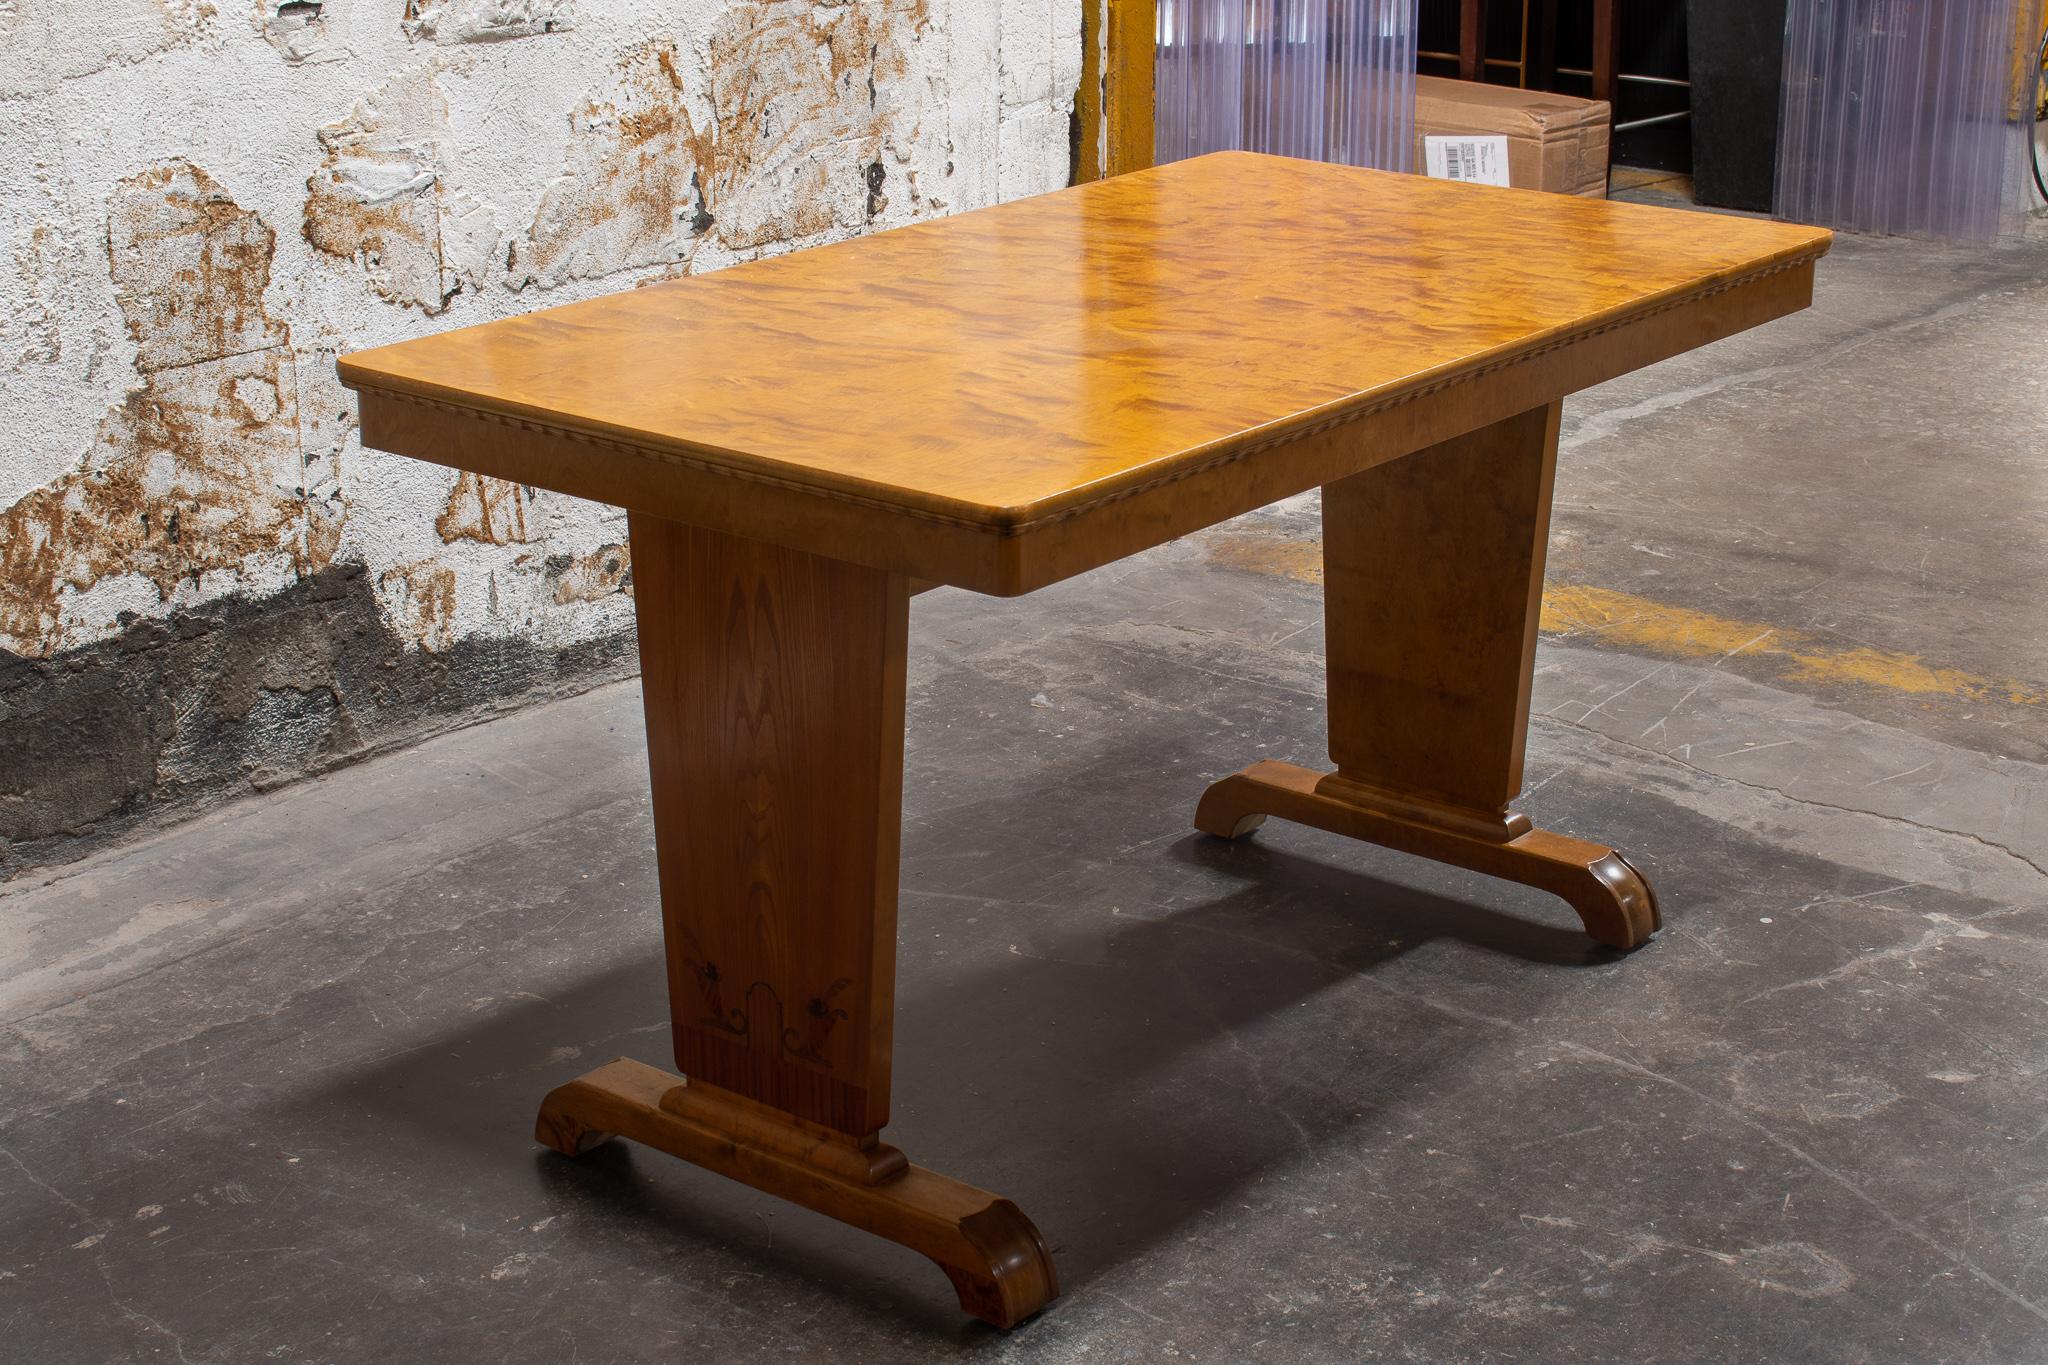 This style of trestle dining table is referred to as a 